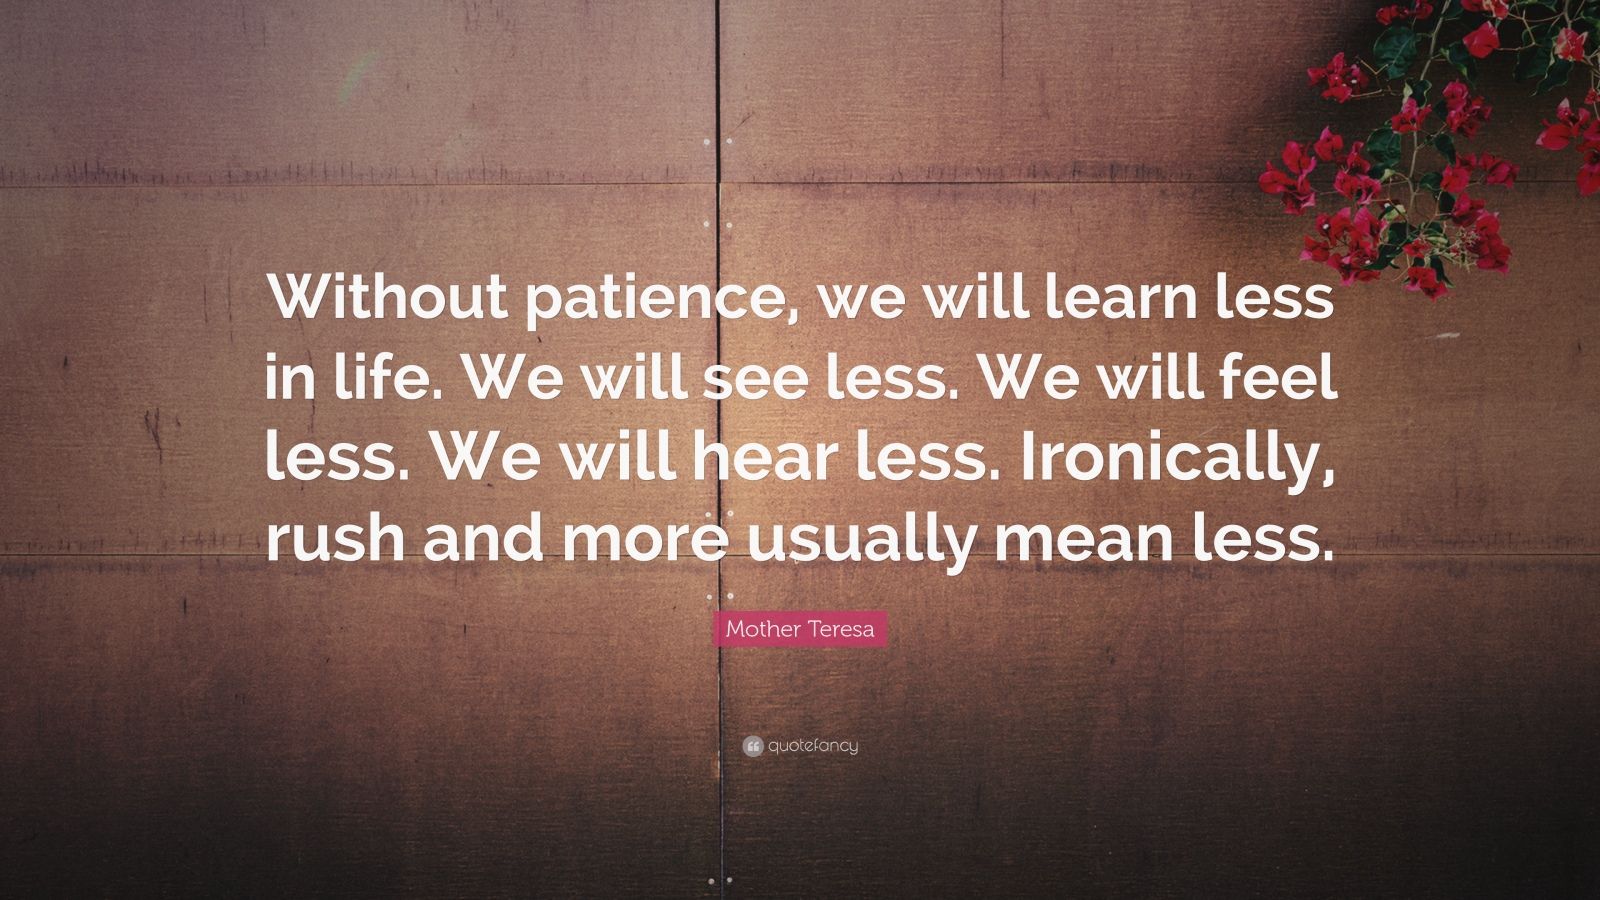 Mother Teresa Quote: “Without patience, we will learn less in life. We will see less. We will feel less. We will hear less. Ironically, rush and more usually mean less.”